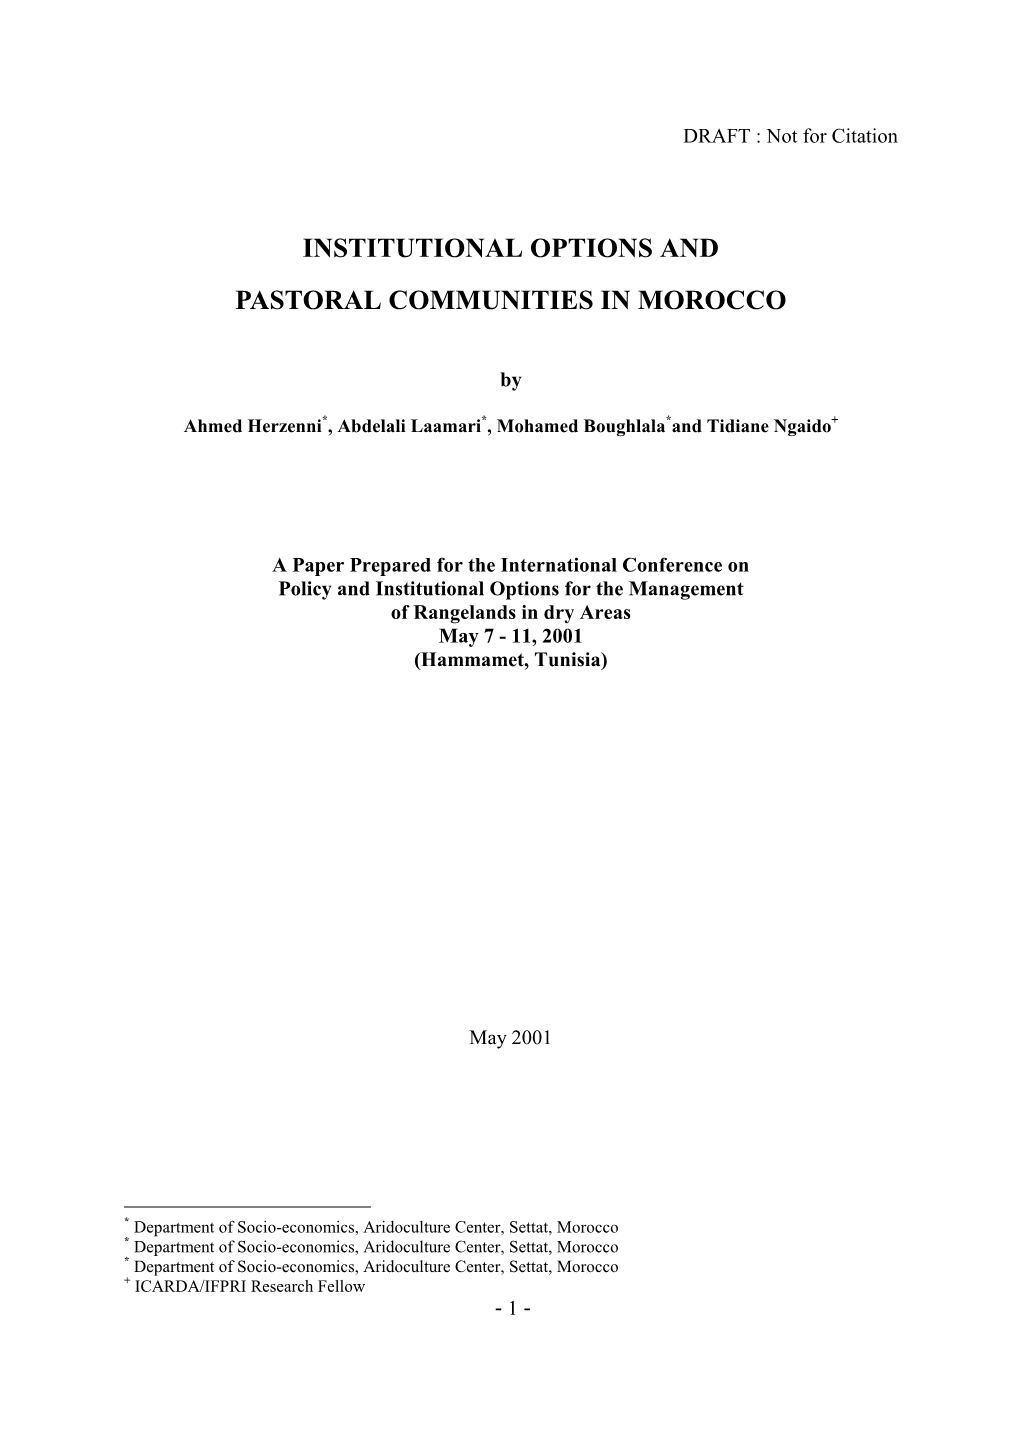 Institutional Options and Pastoral Communities in Morocco